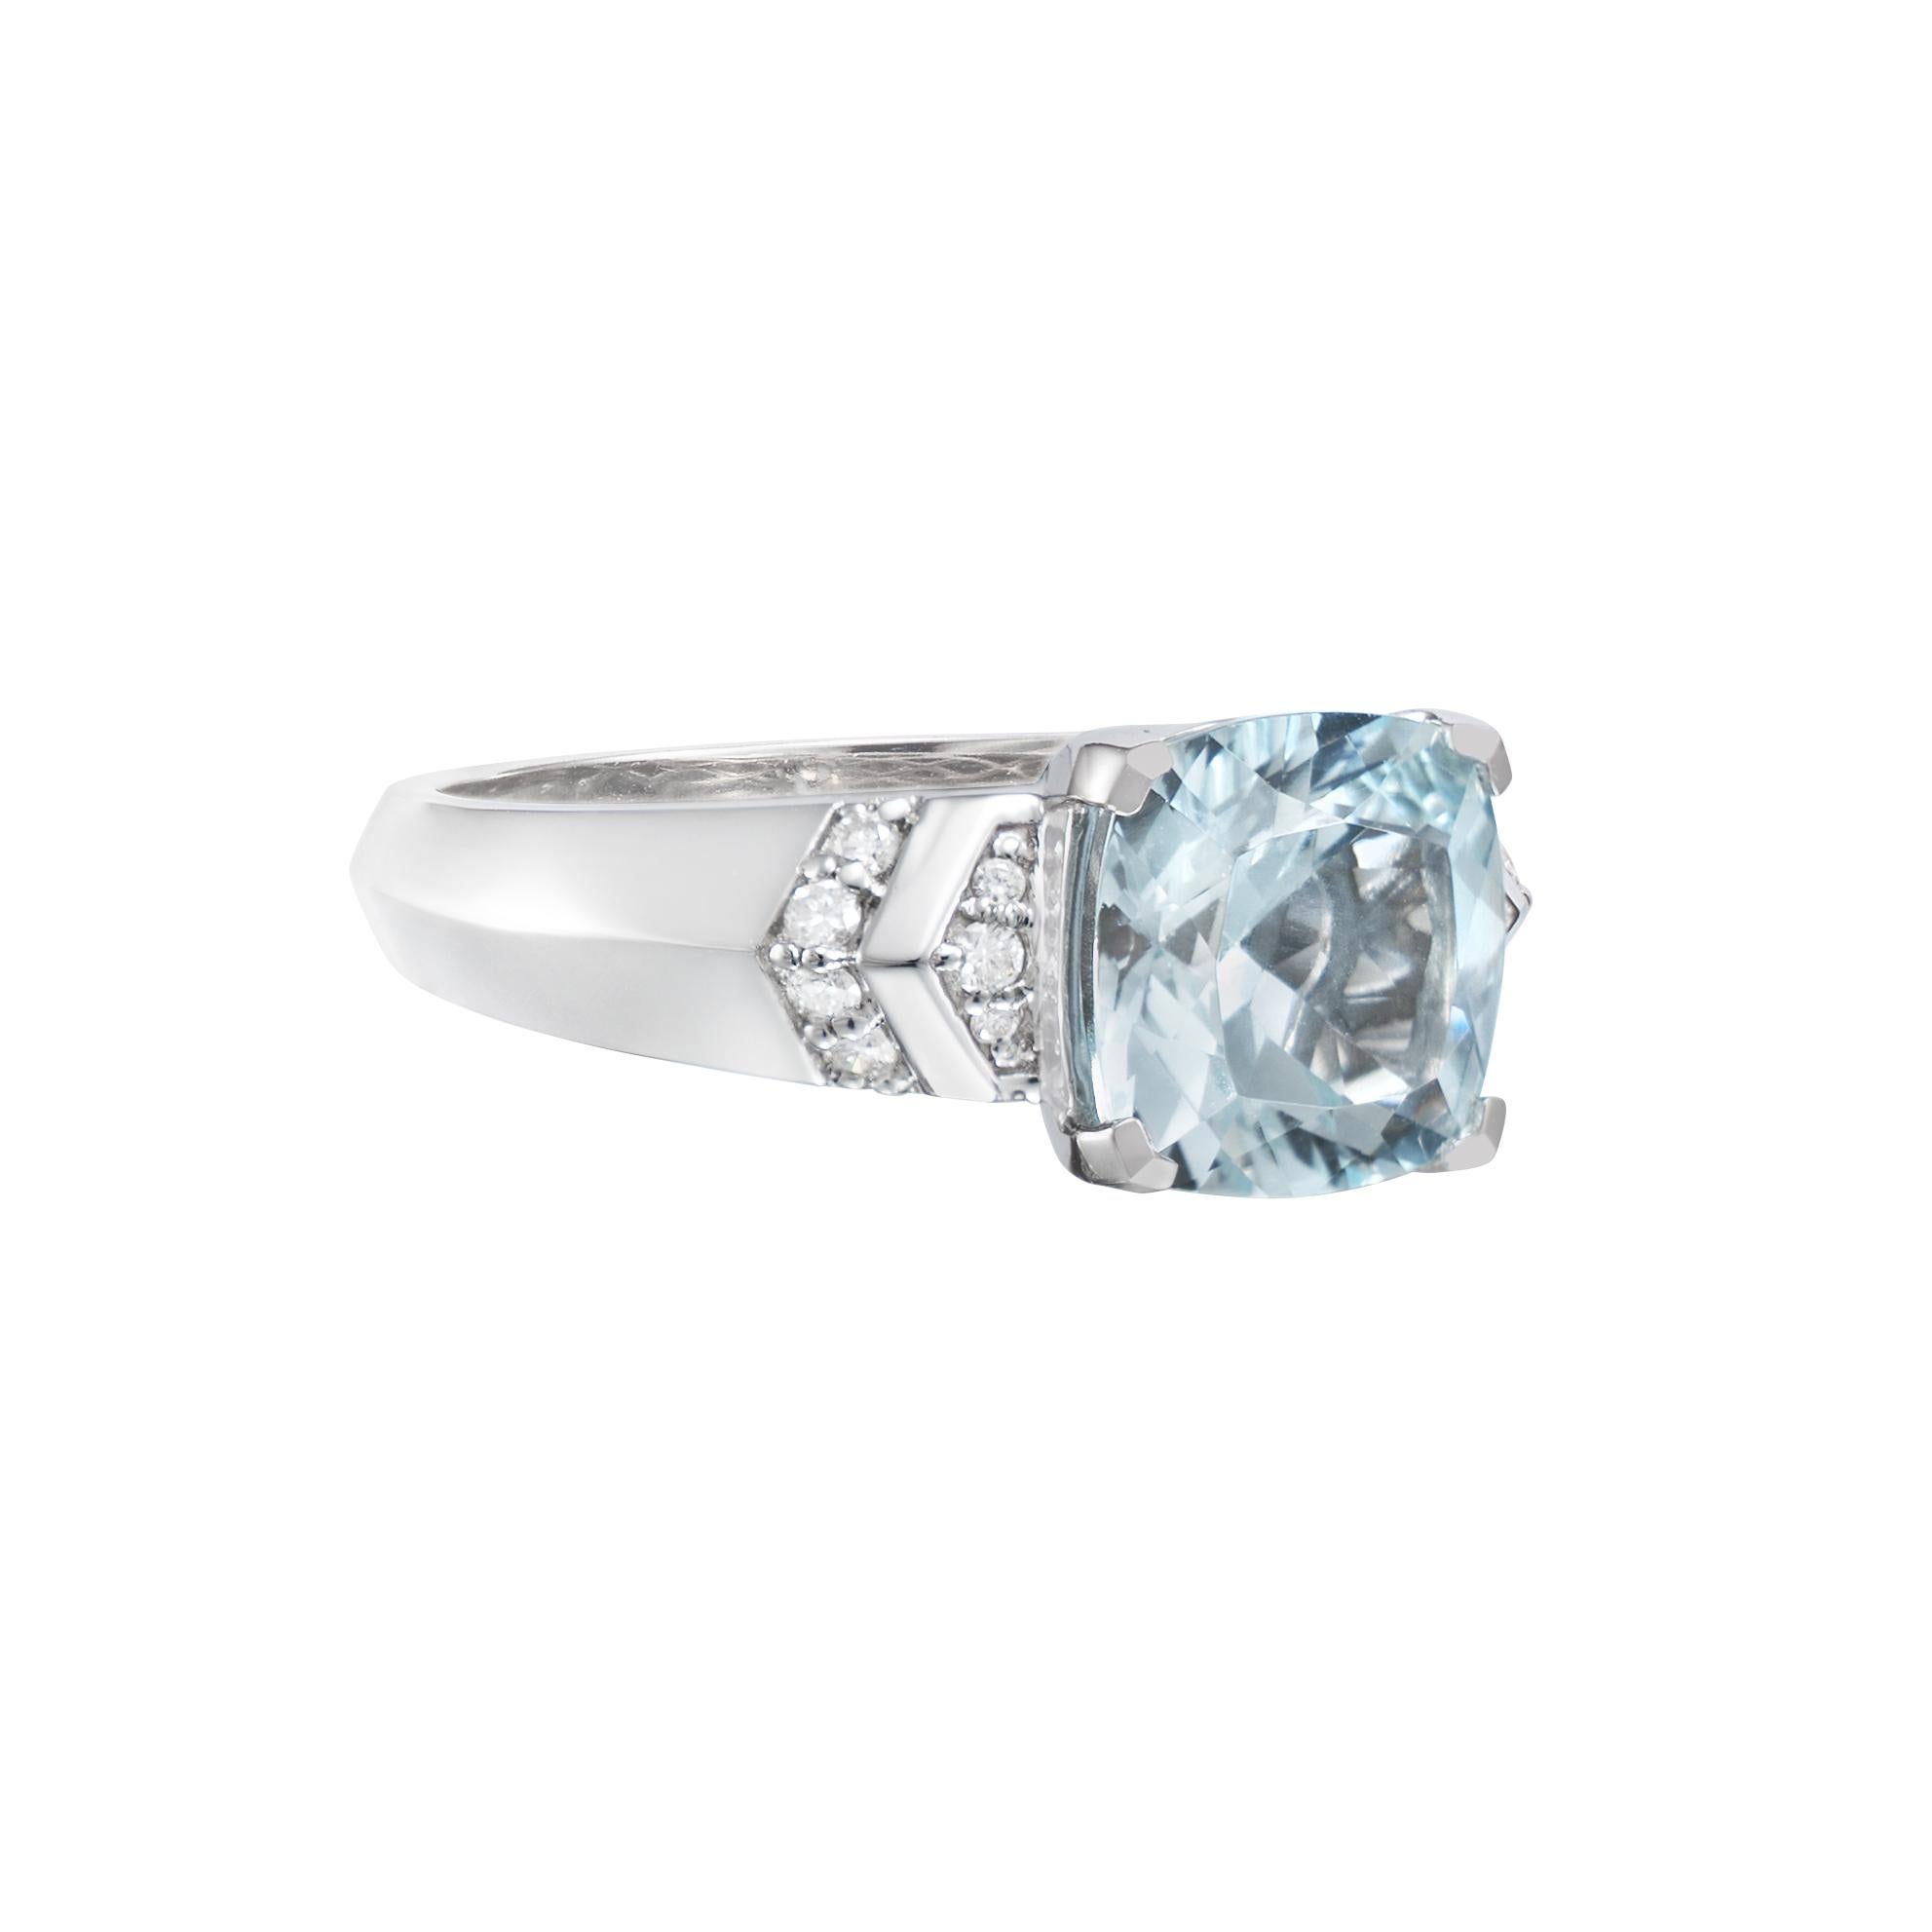 This collection features an array of aquamarines with an icy blue hue that is as cool as it gets! Accented with diamonds these pieces are made in white gold and present a classic yet elegant look. 

Aquamarine and White Diamond Ring in 18 Karat